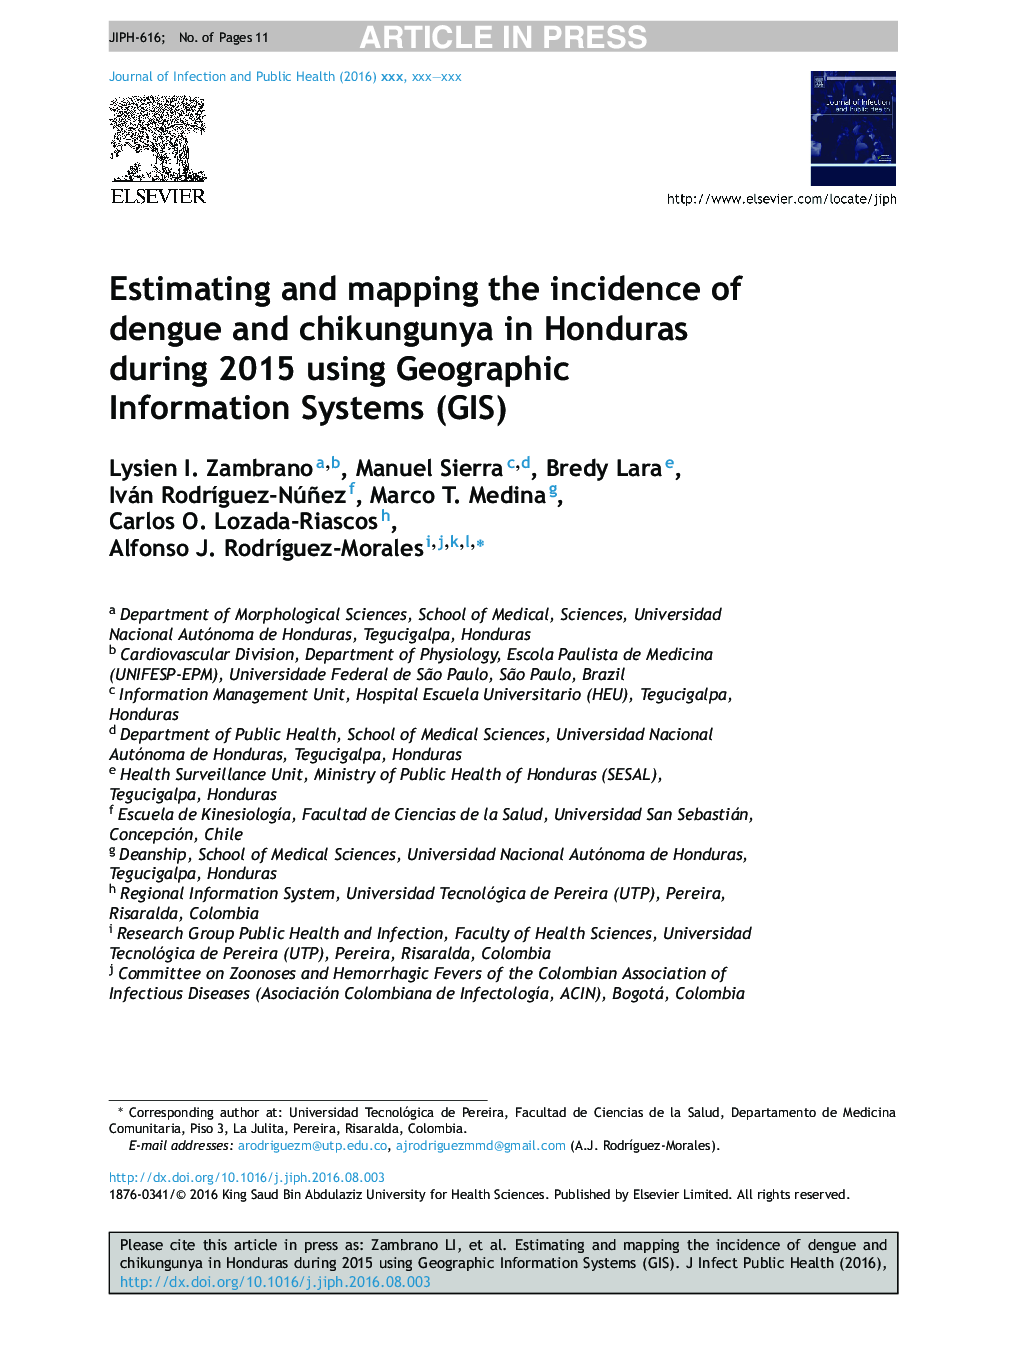 Estimating and mapping the incidence of dengue and chikungunya in Honduras during 2015 using Geographic Information Systems (GIS)